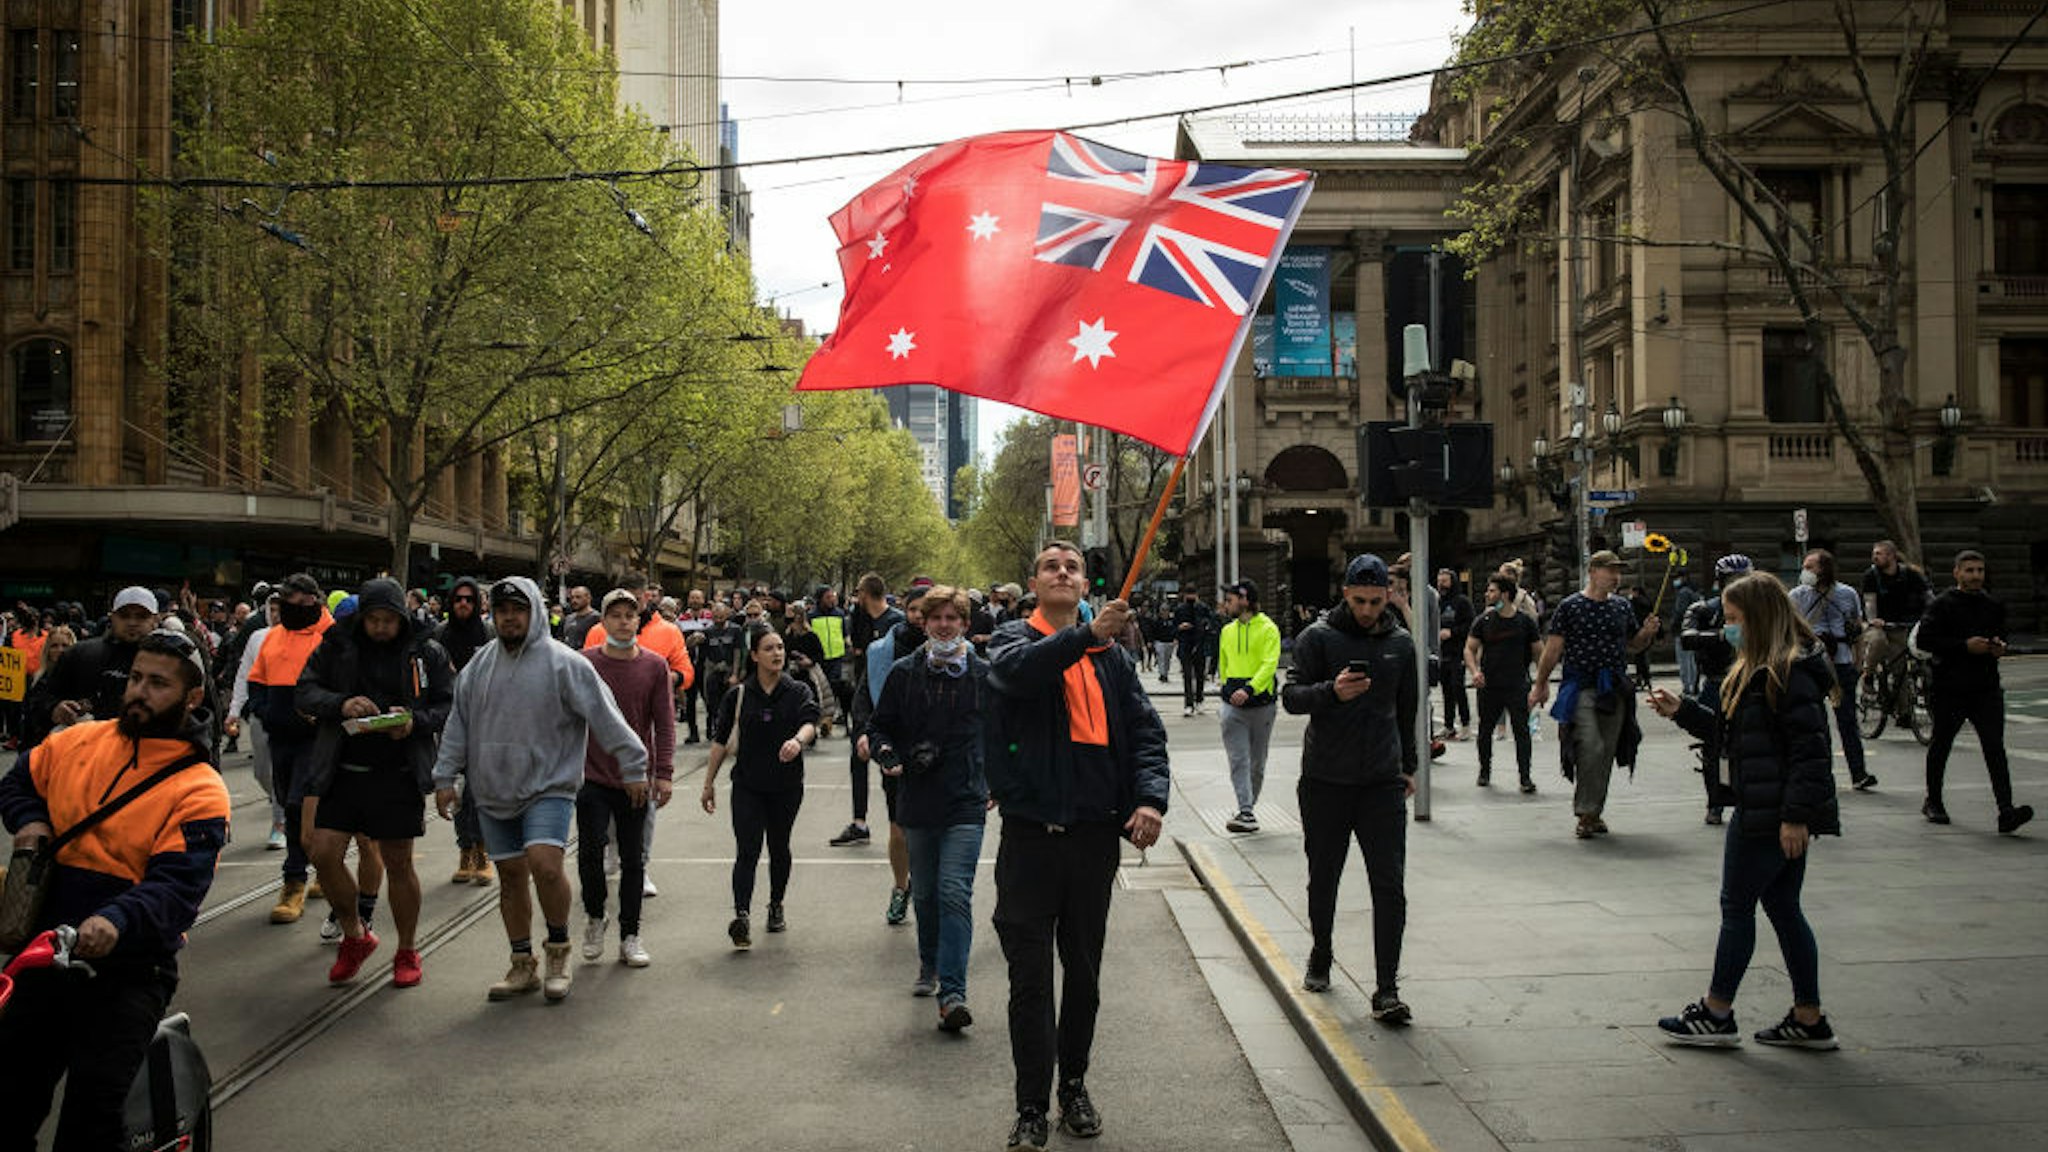 Protesters march through the streets on September 22, 2021 in Melbourne, Australia.